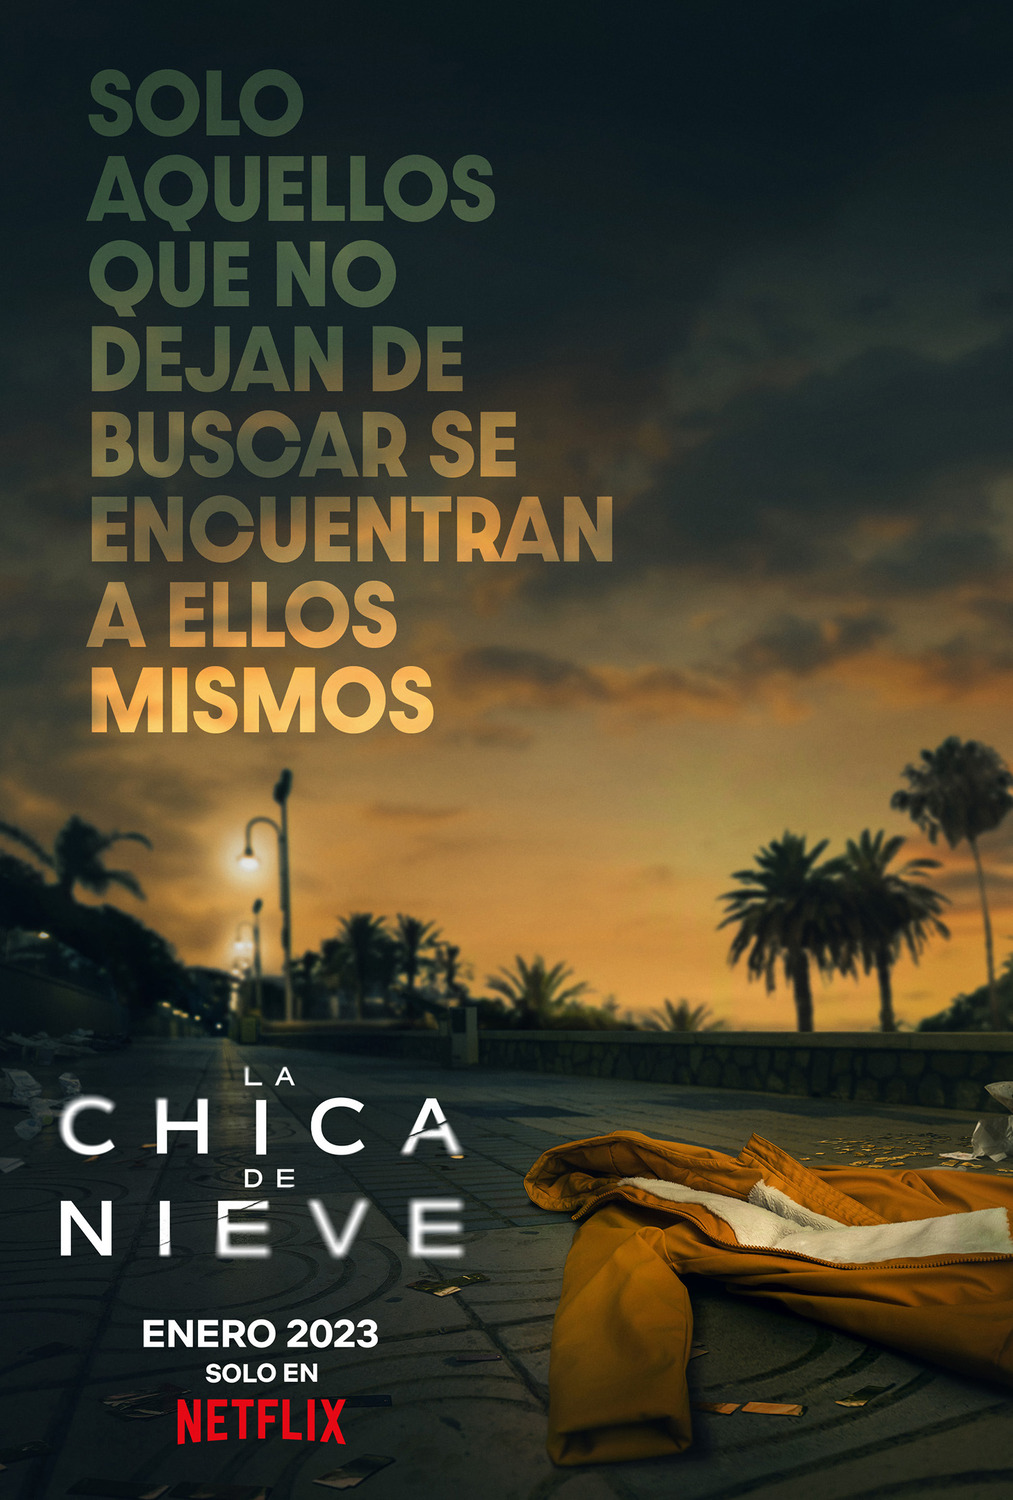 Extra Large TV Poster Image for La chica de nieve (#1 of 6)